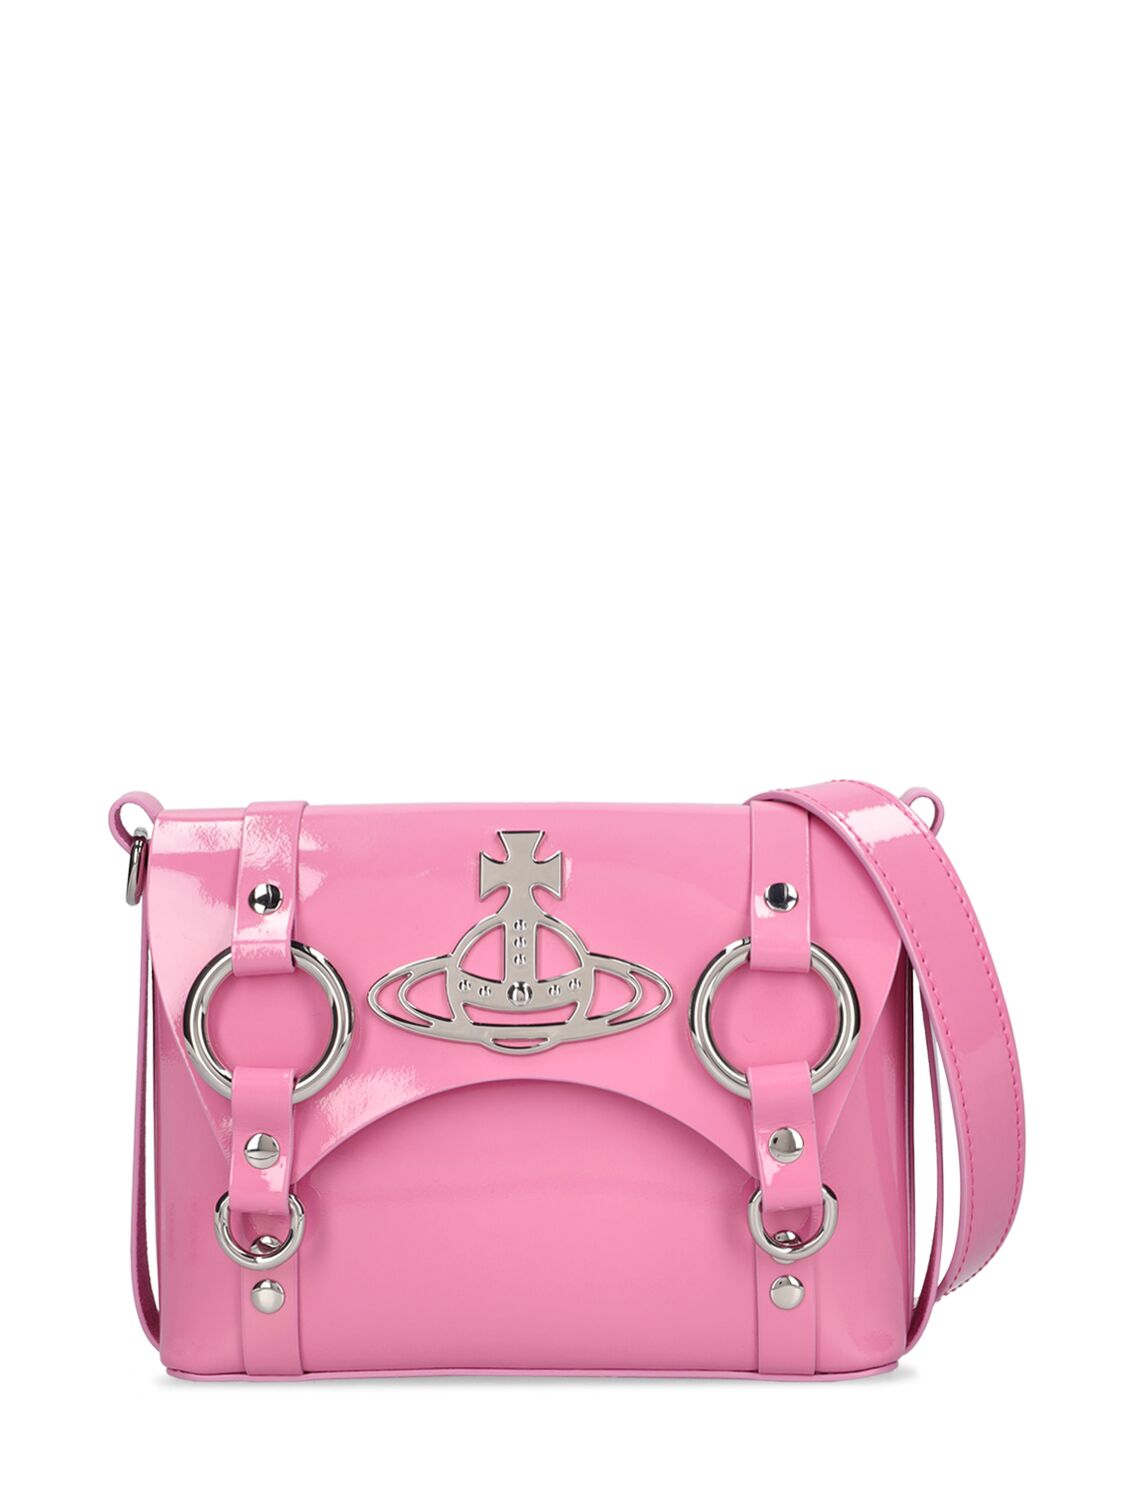 Vivienne Westwood Kim Patent Leather Crossbody Bag In Pink